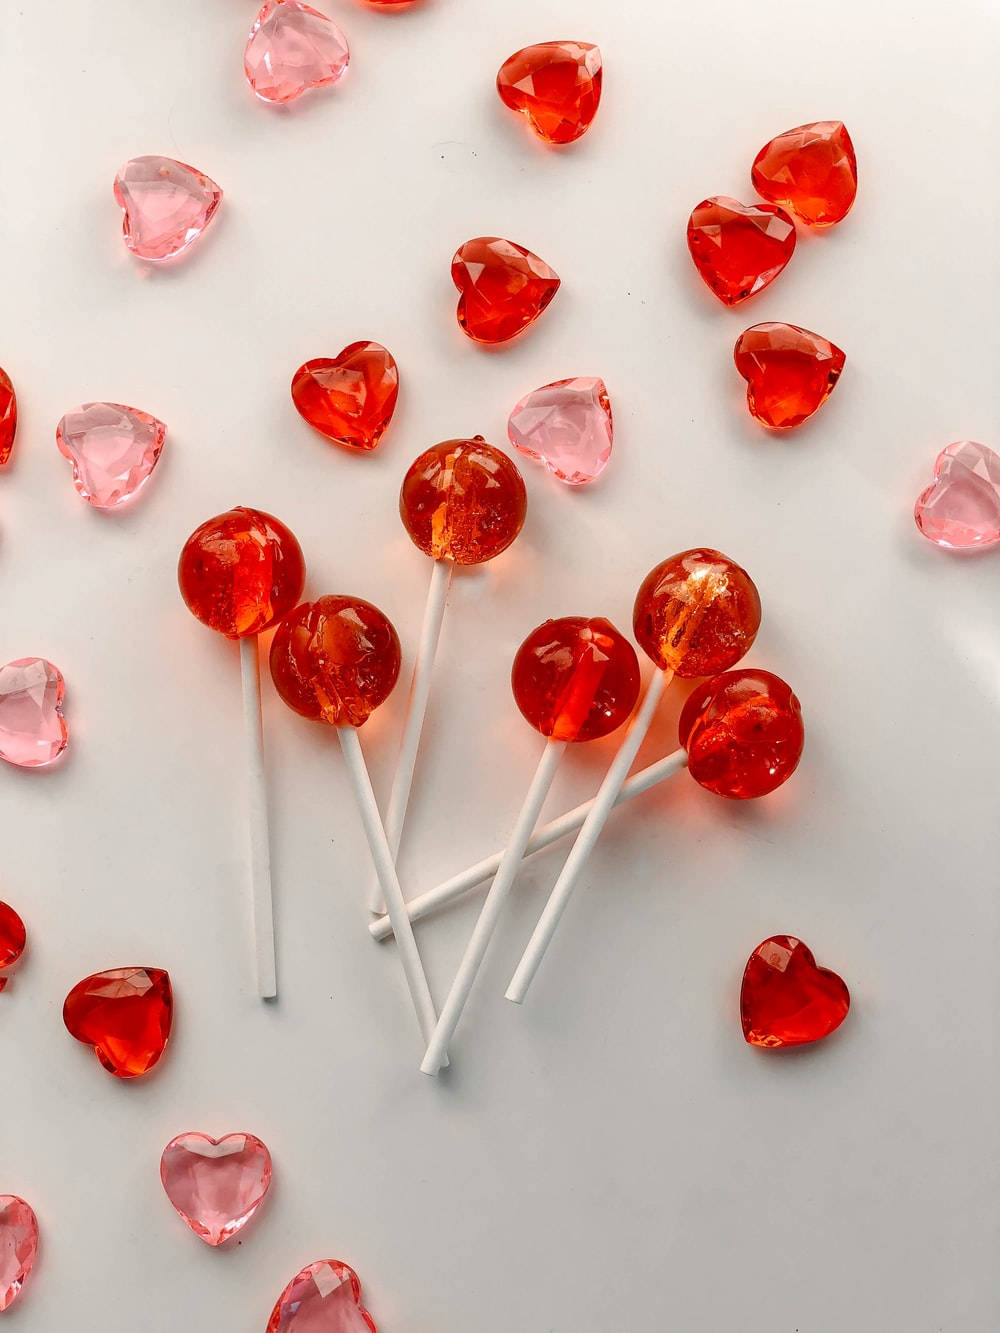 Heart Aesthetic Crystals And Lollipops Wallpaper